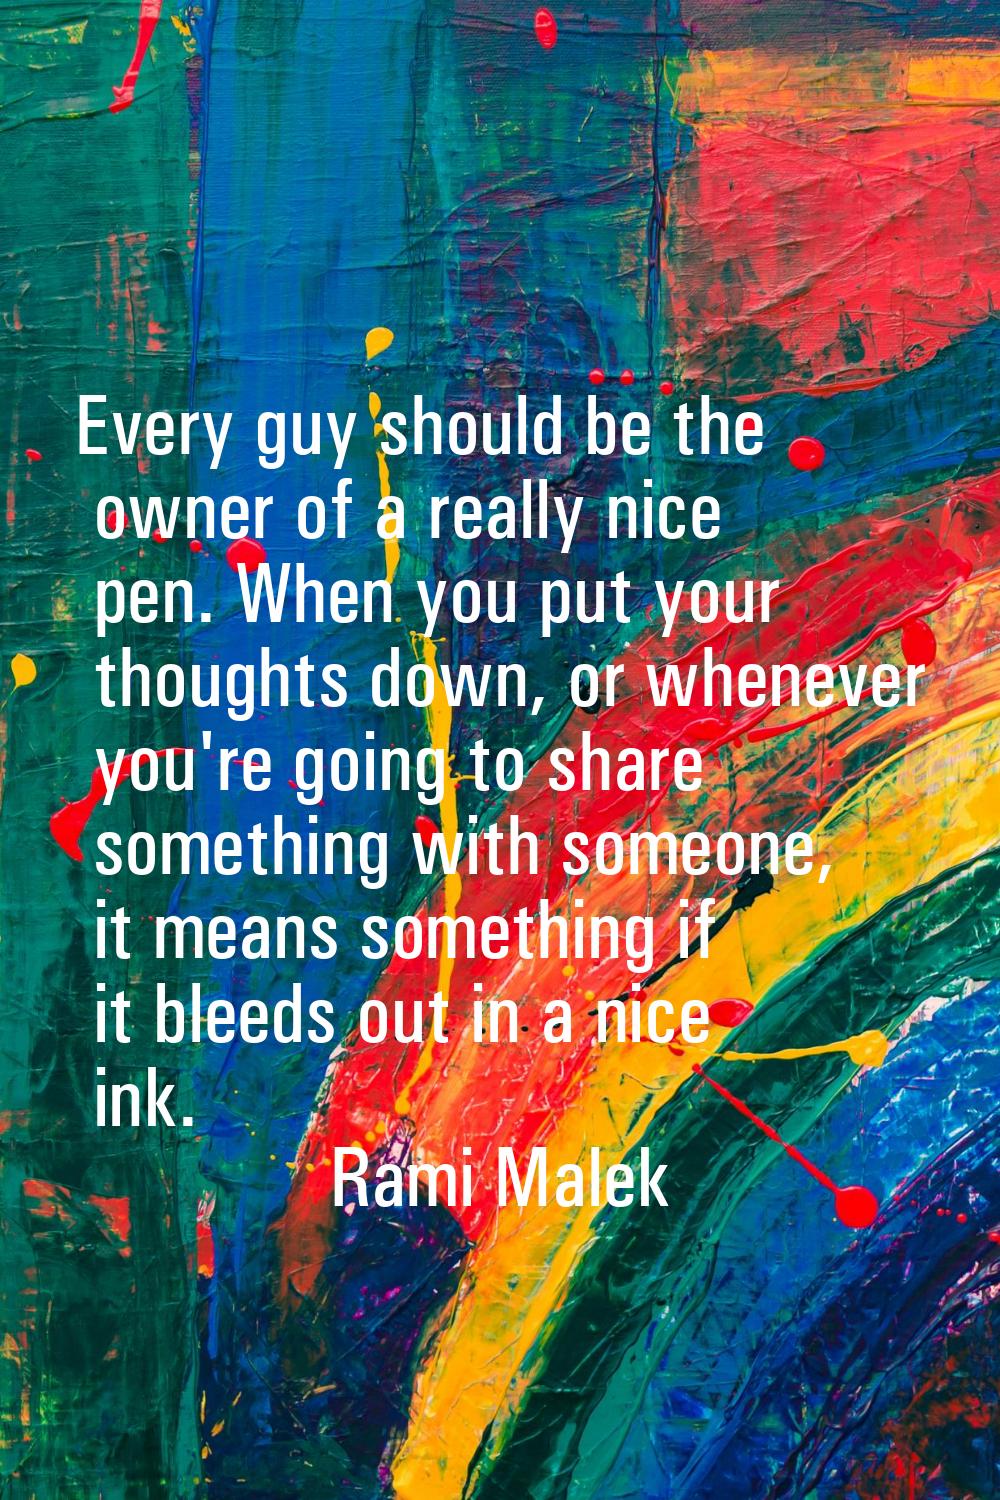 Every guy should be the owner of a really nice pen. When you put your thoughts down, or whenever yo